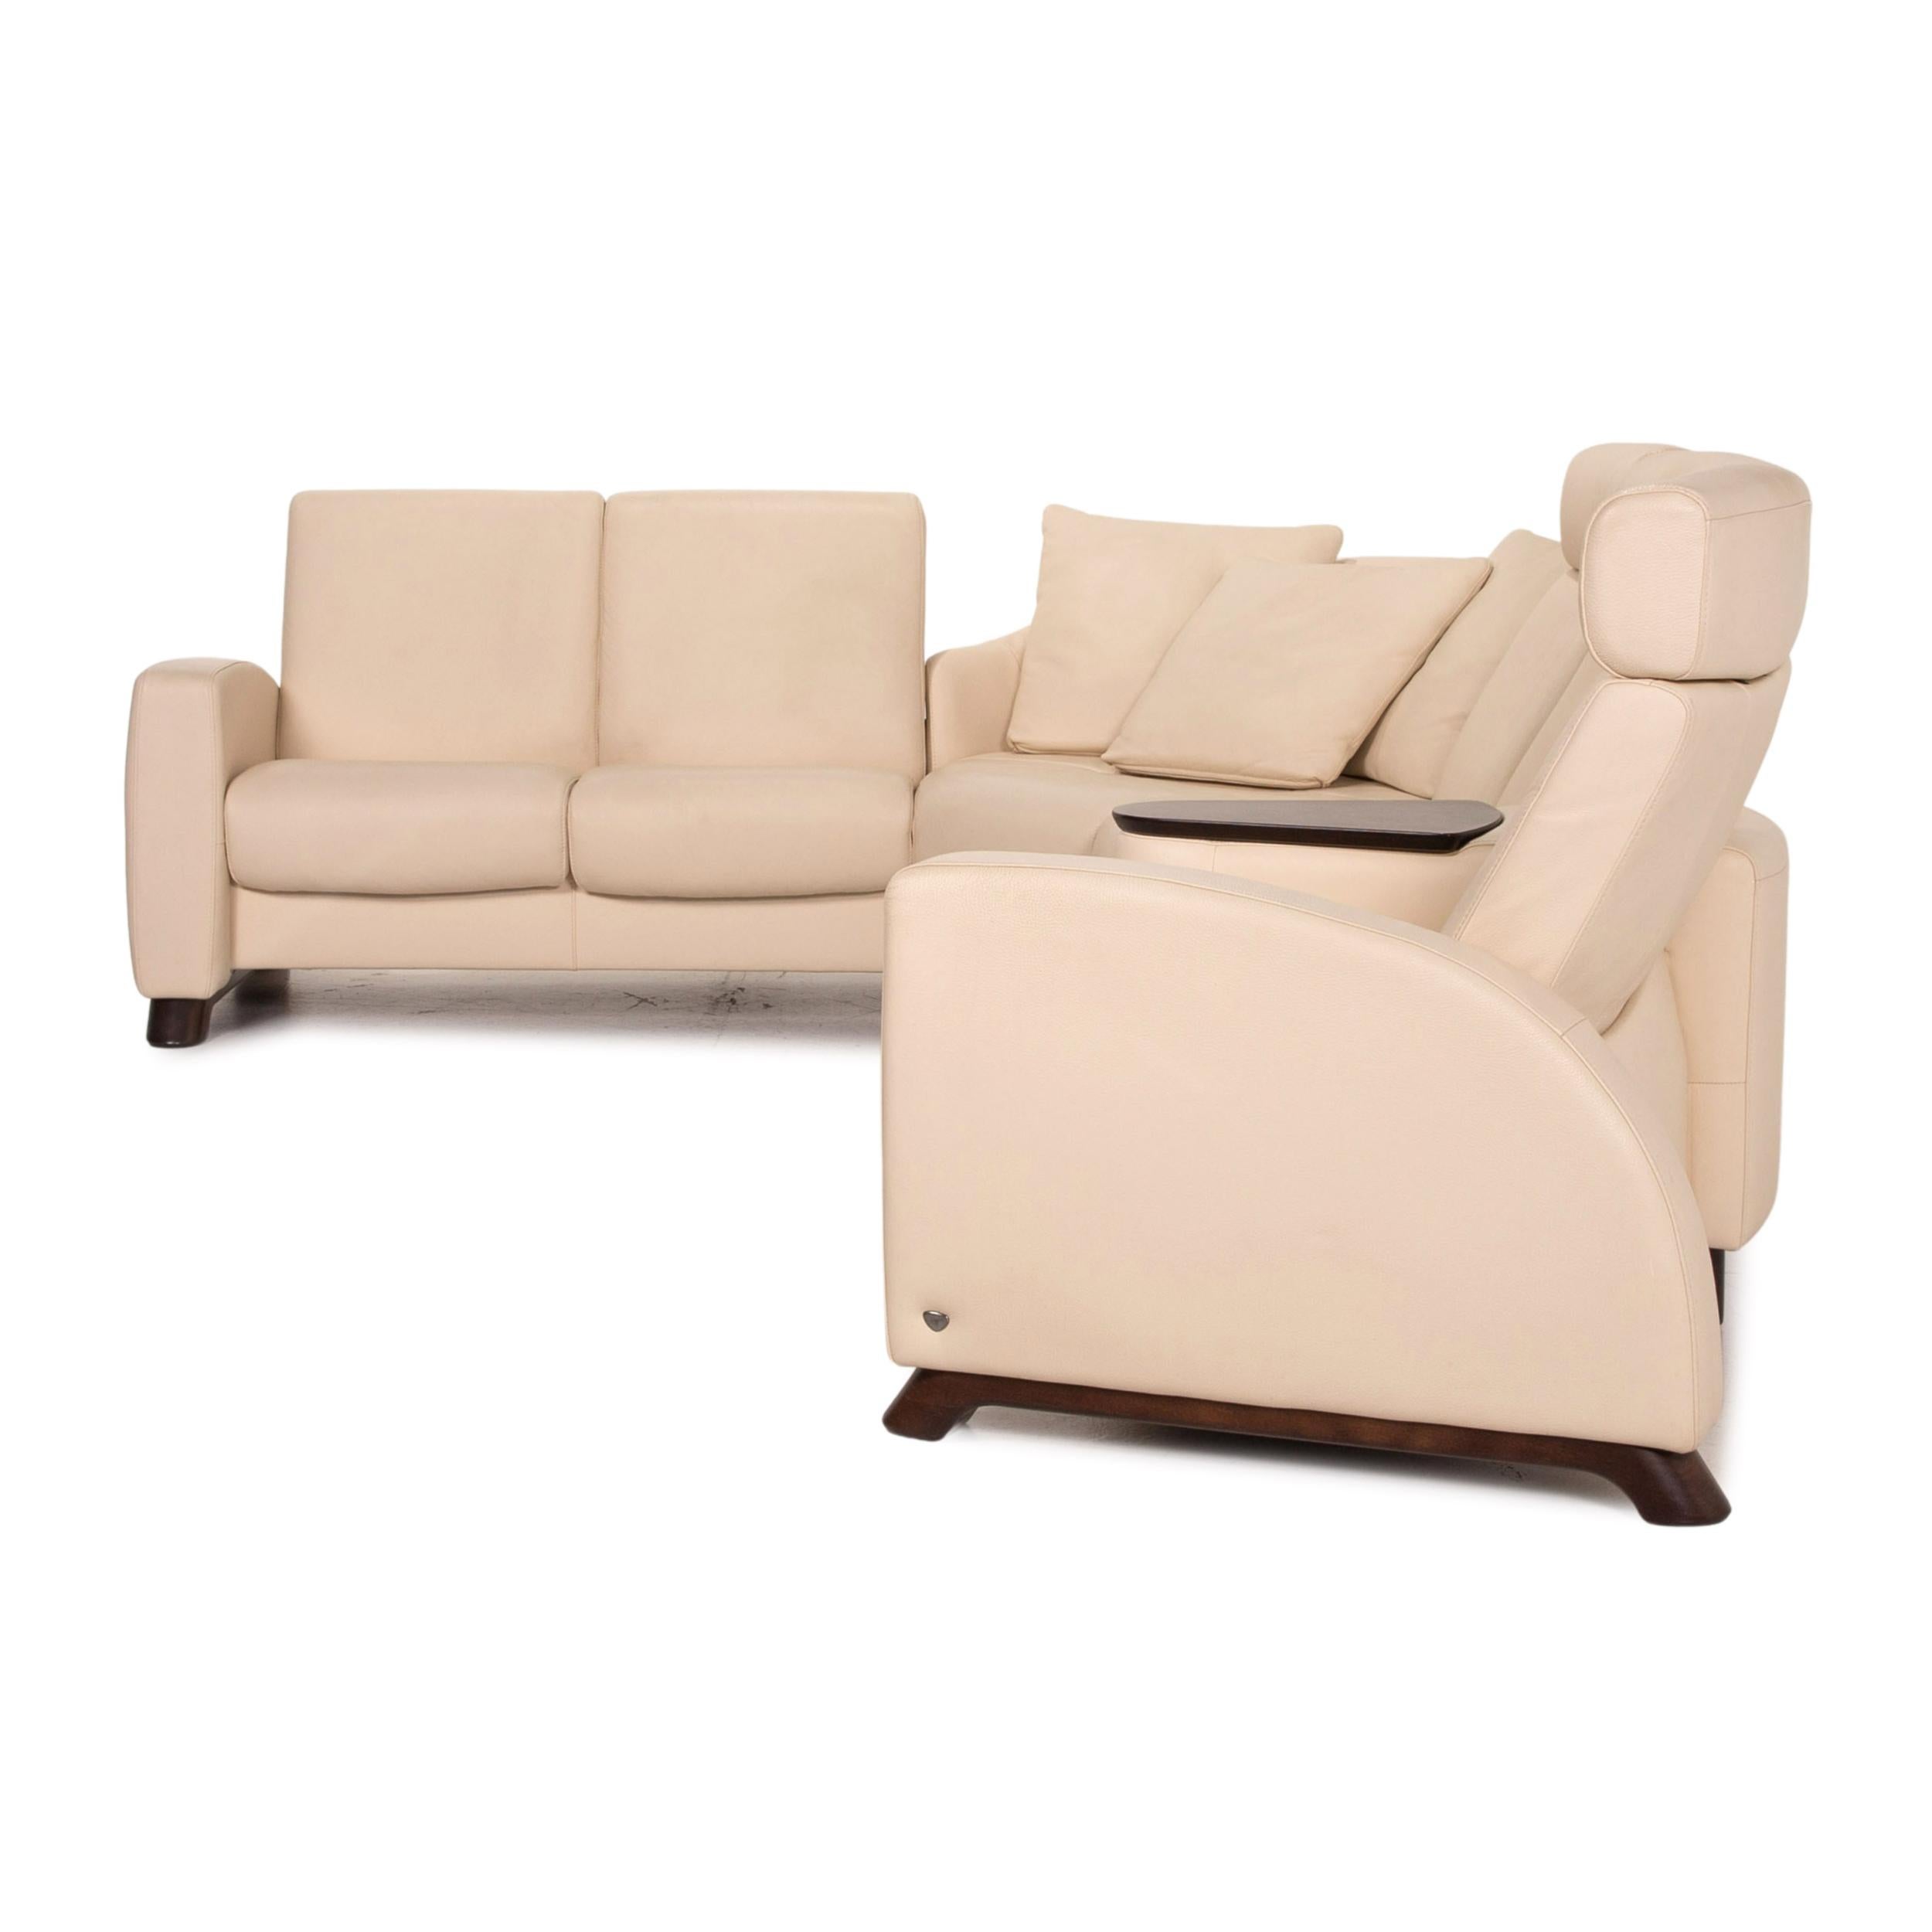 Stressless Arion Leather Corner Sofa Cream Relax Function Sofa Couch For Sale 6